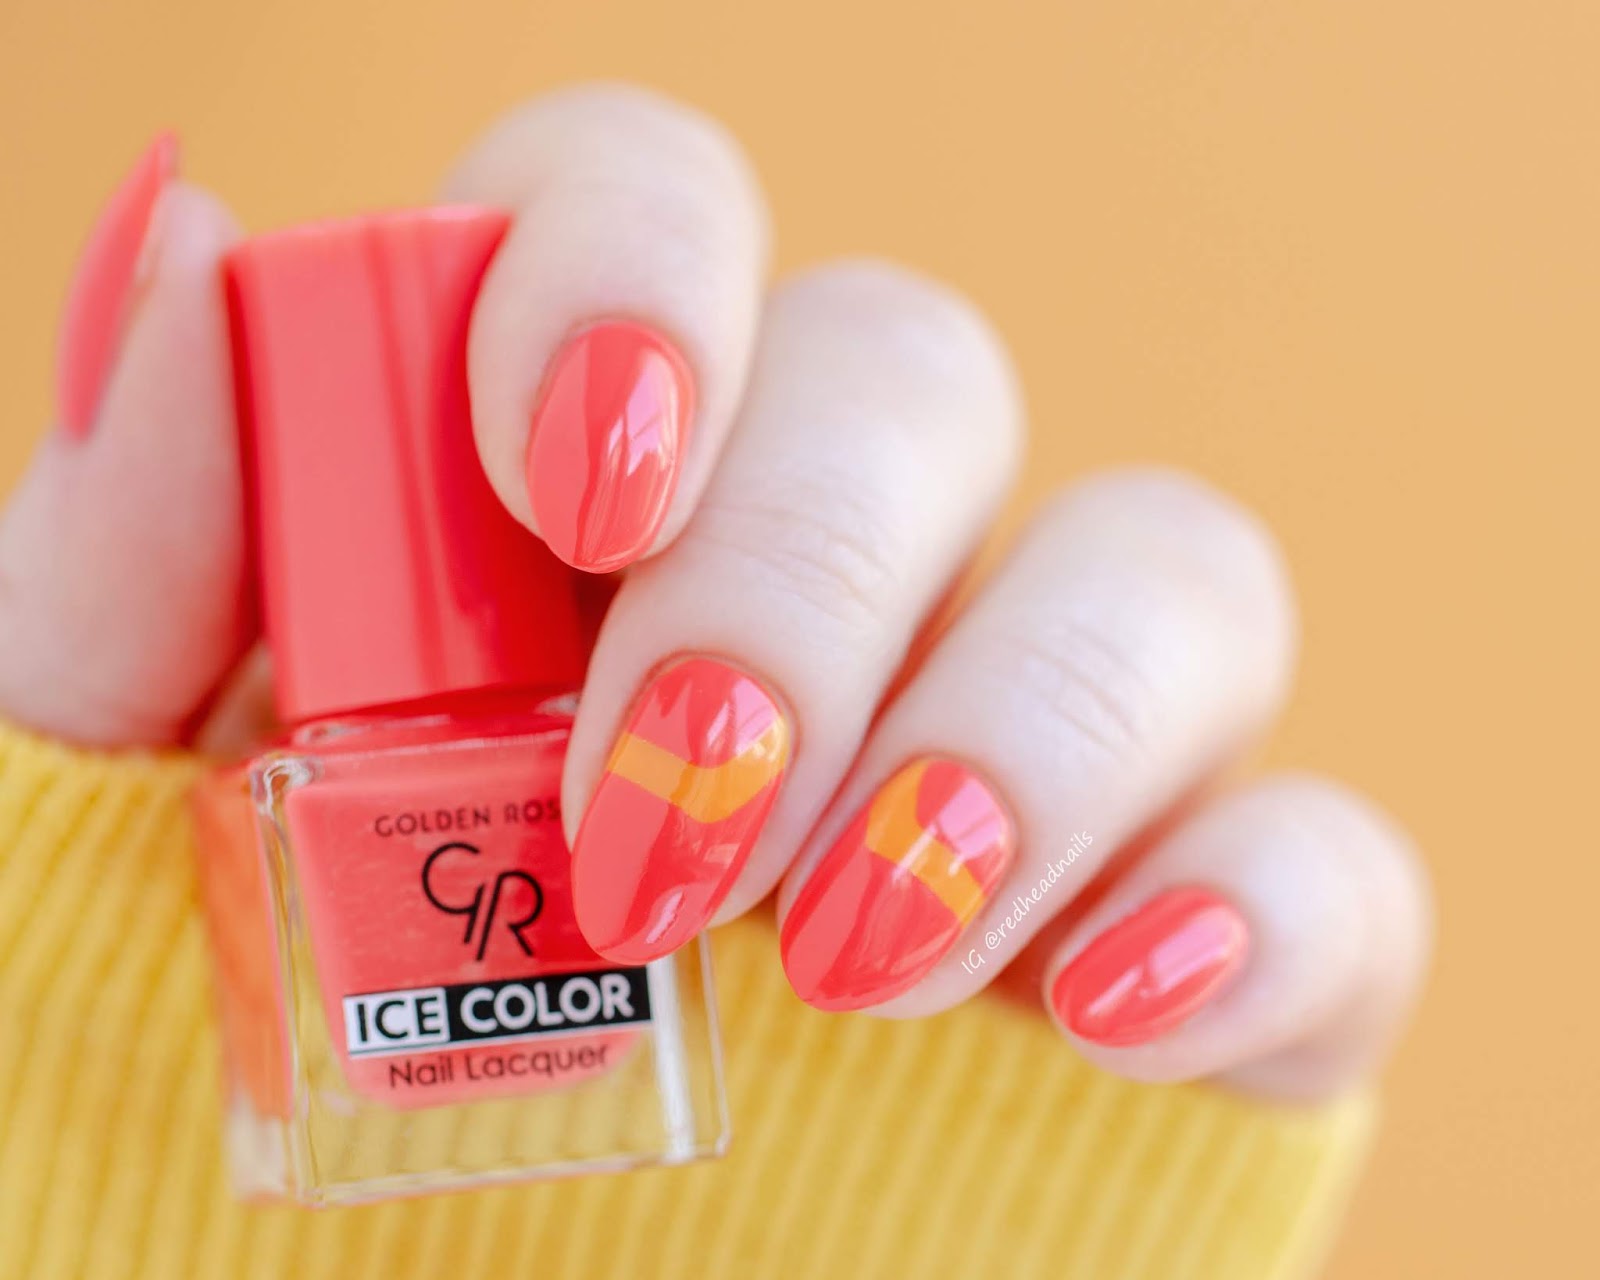 Golden Rose Ice Color 111 swatch